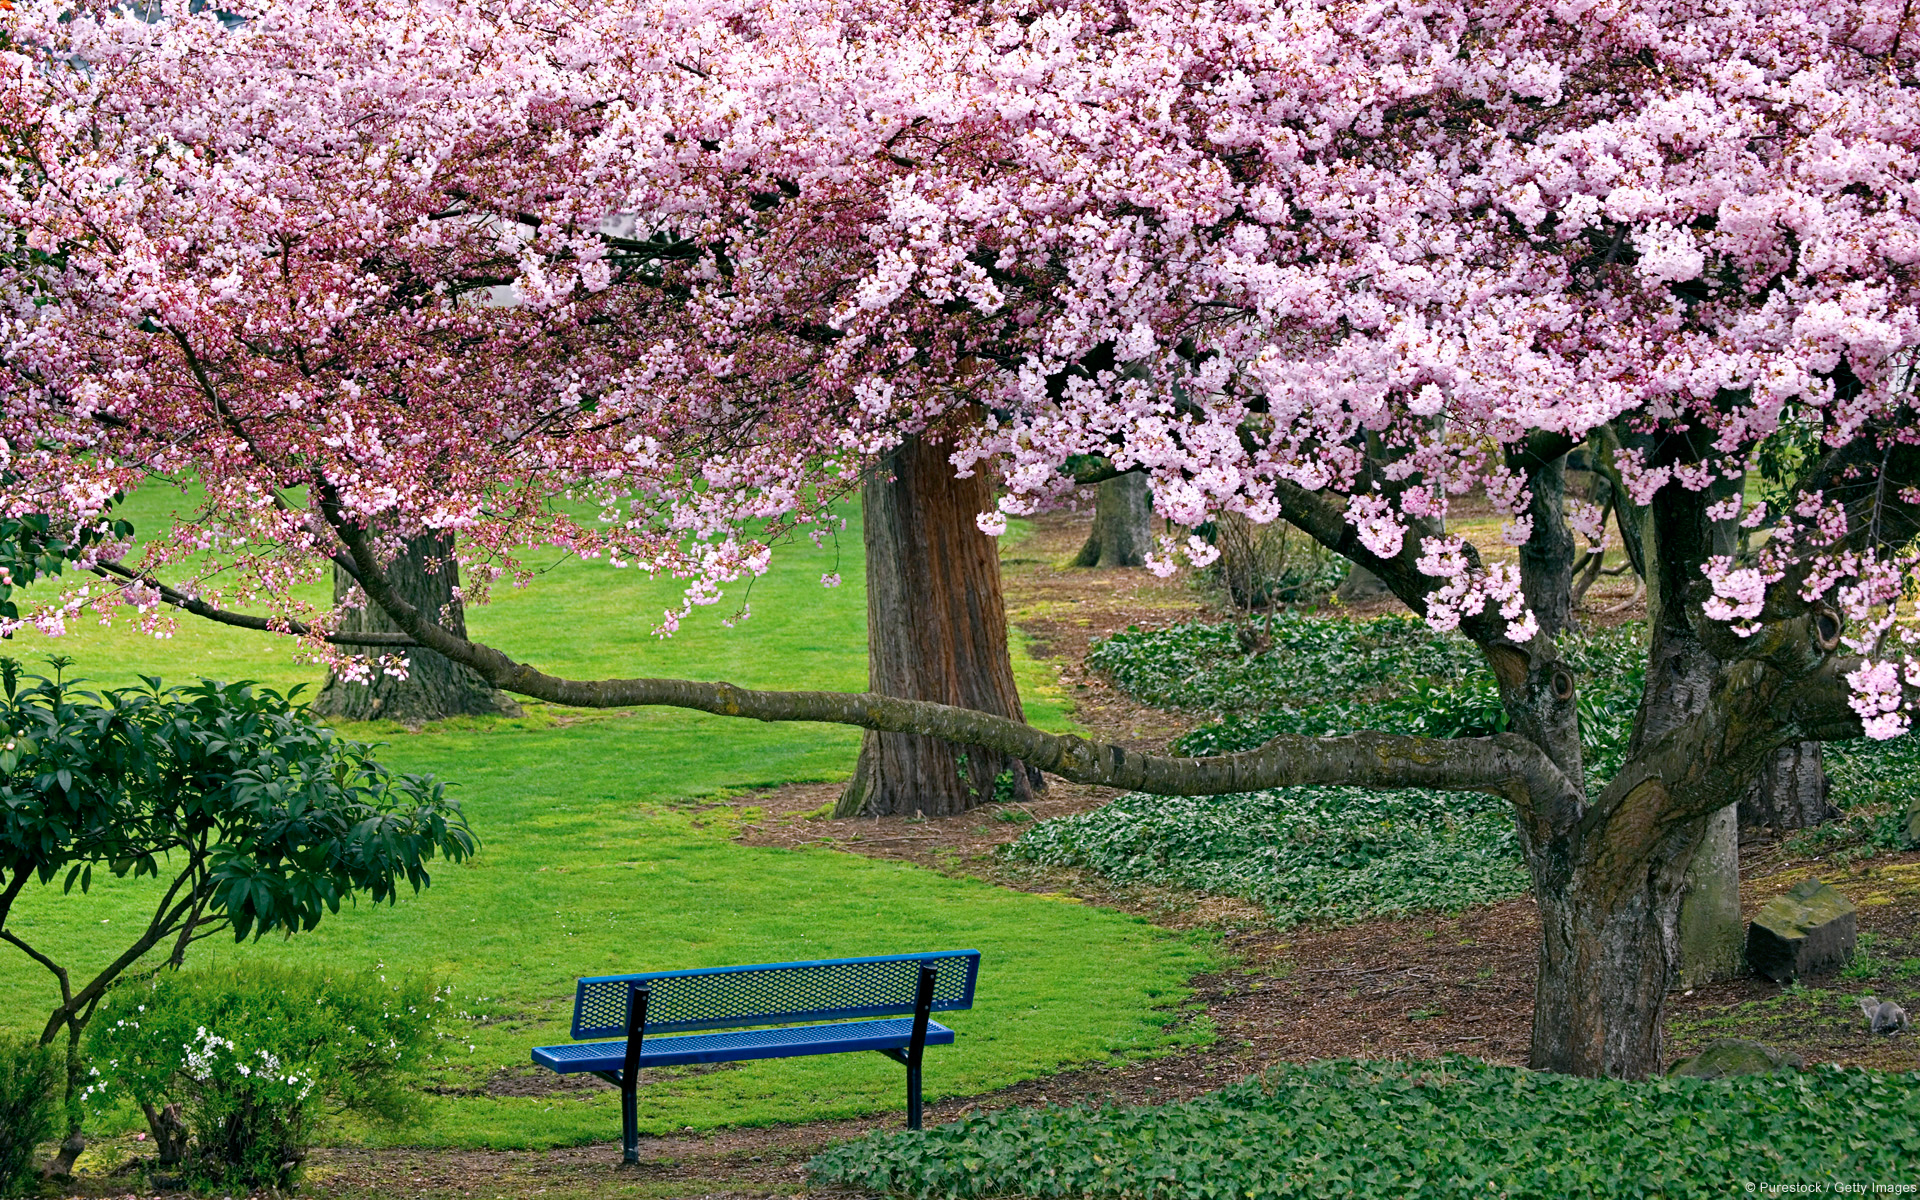  this nature desktop wallpaper your official countdown to spring